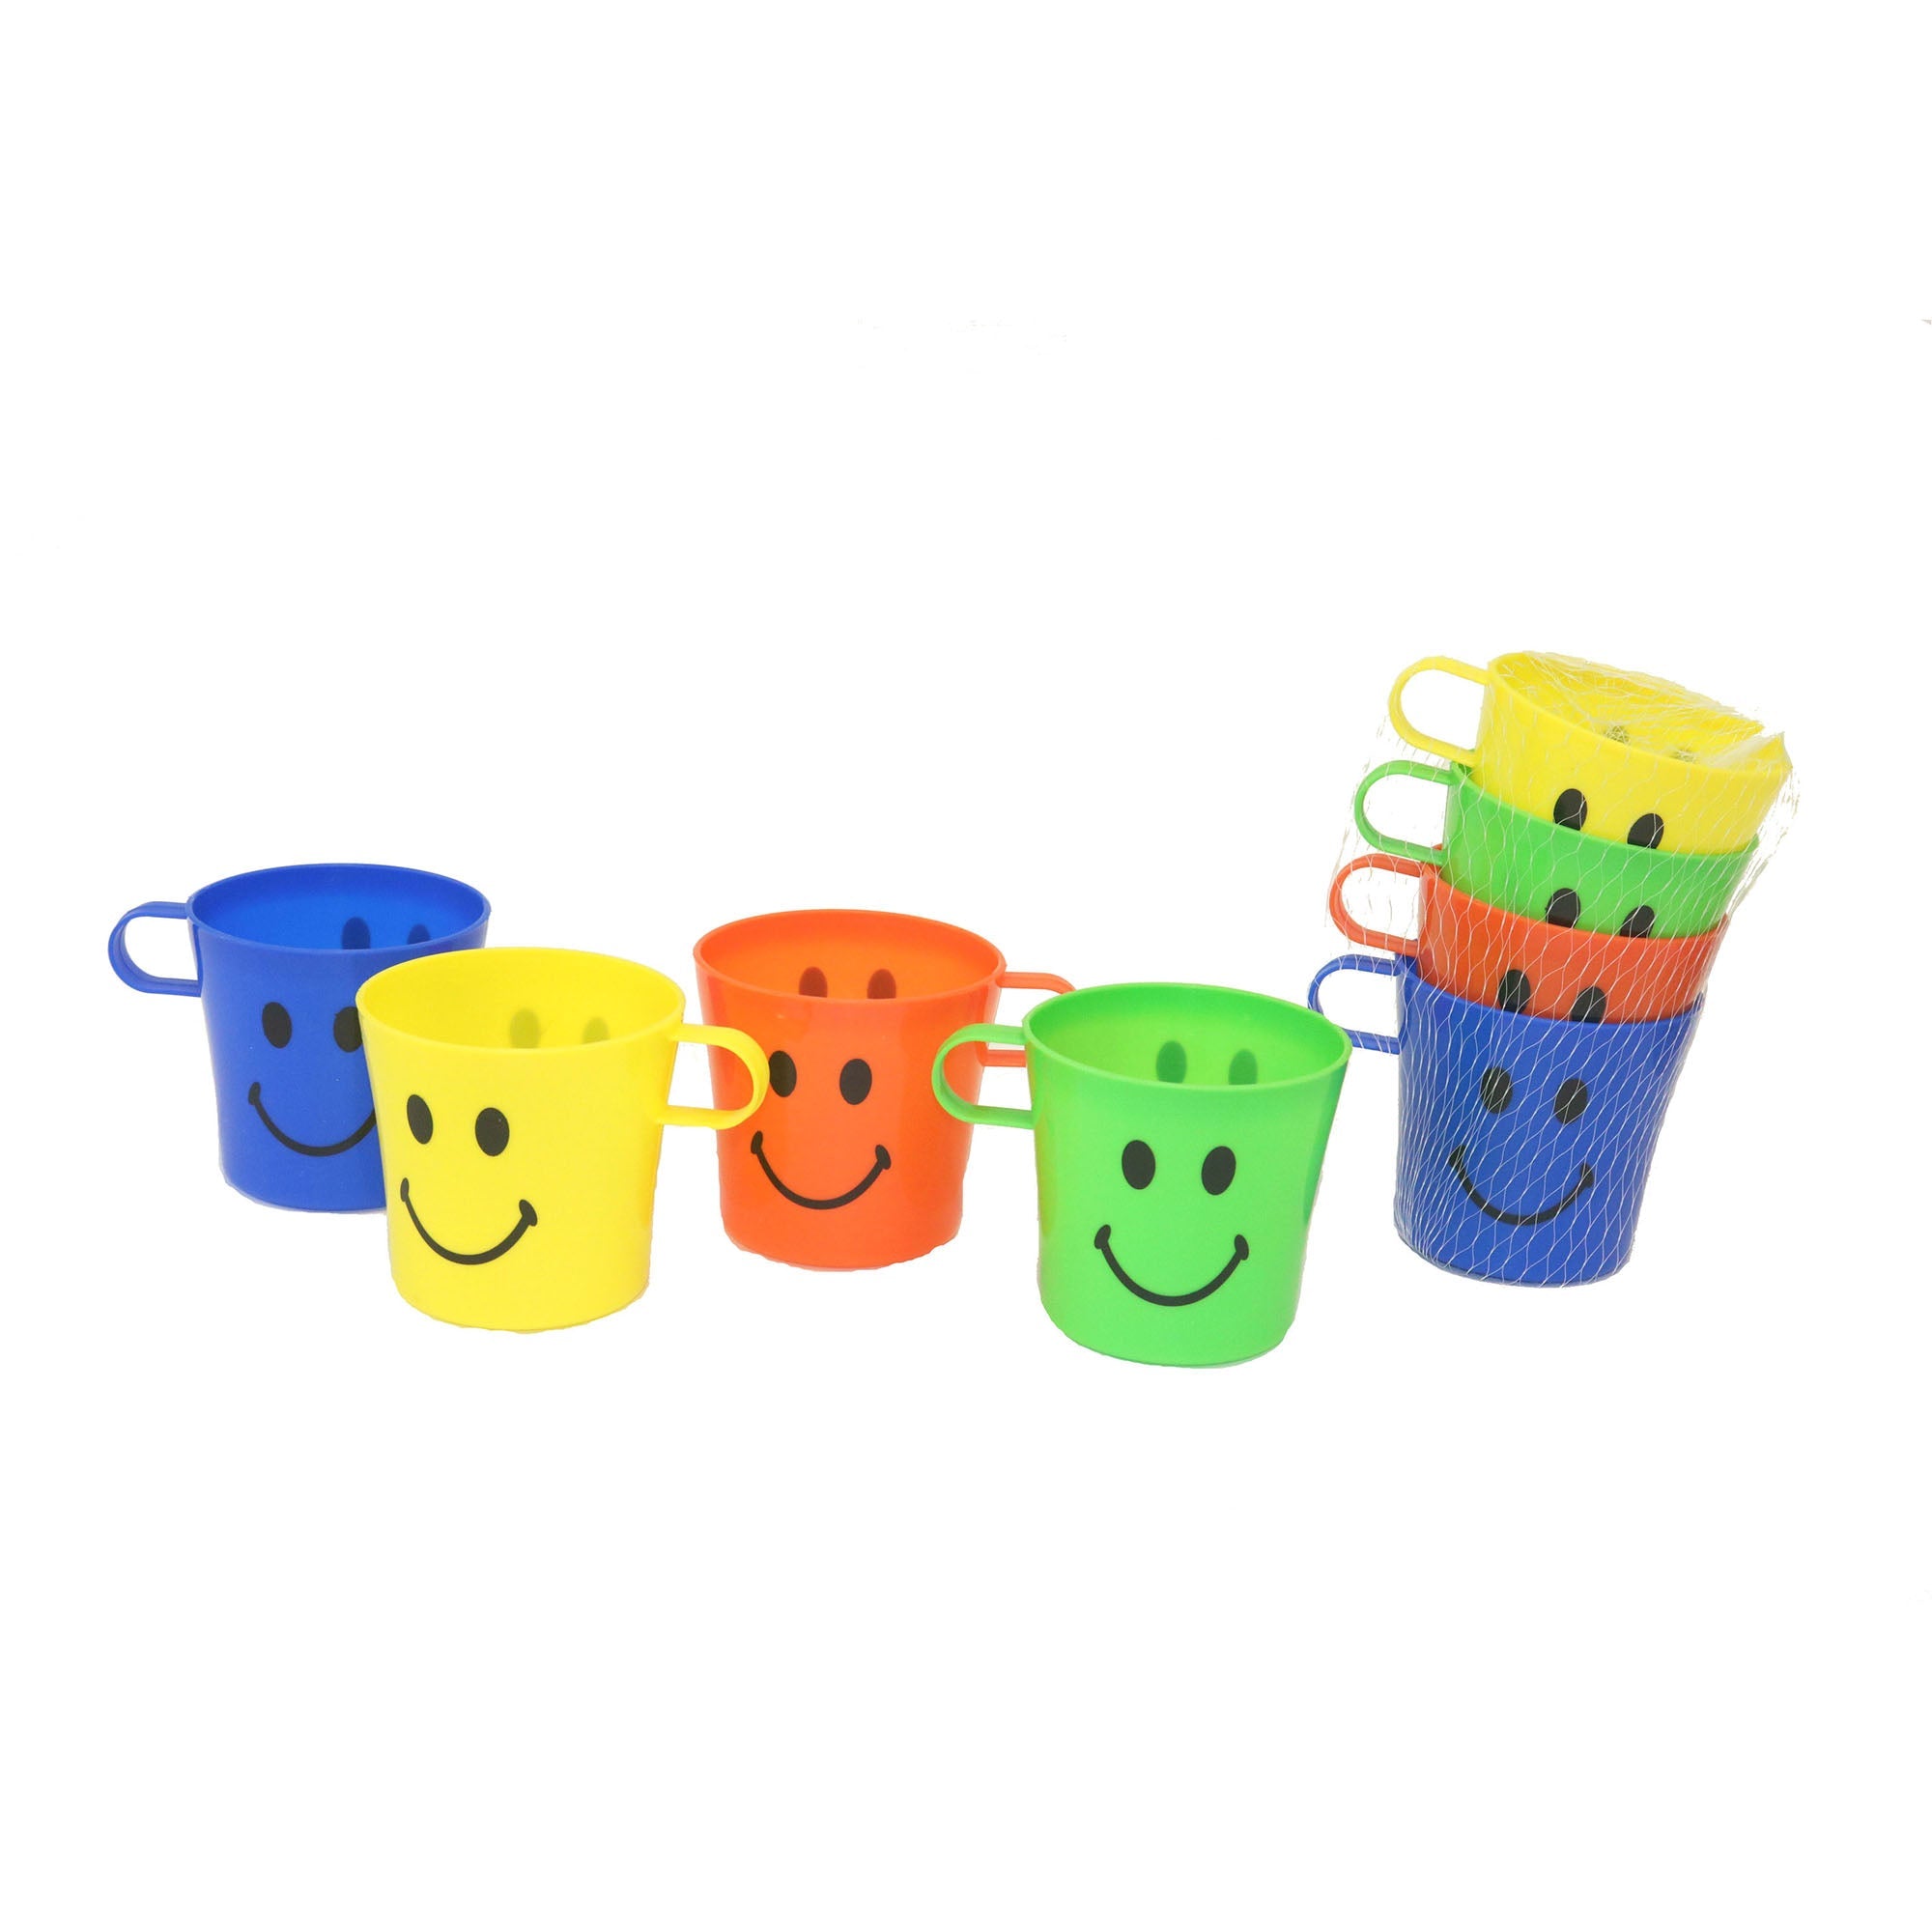 4 Plastic Smiling Cups 3.14x3.34in